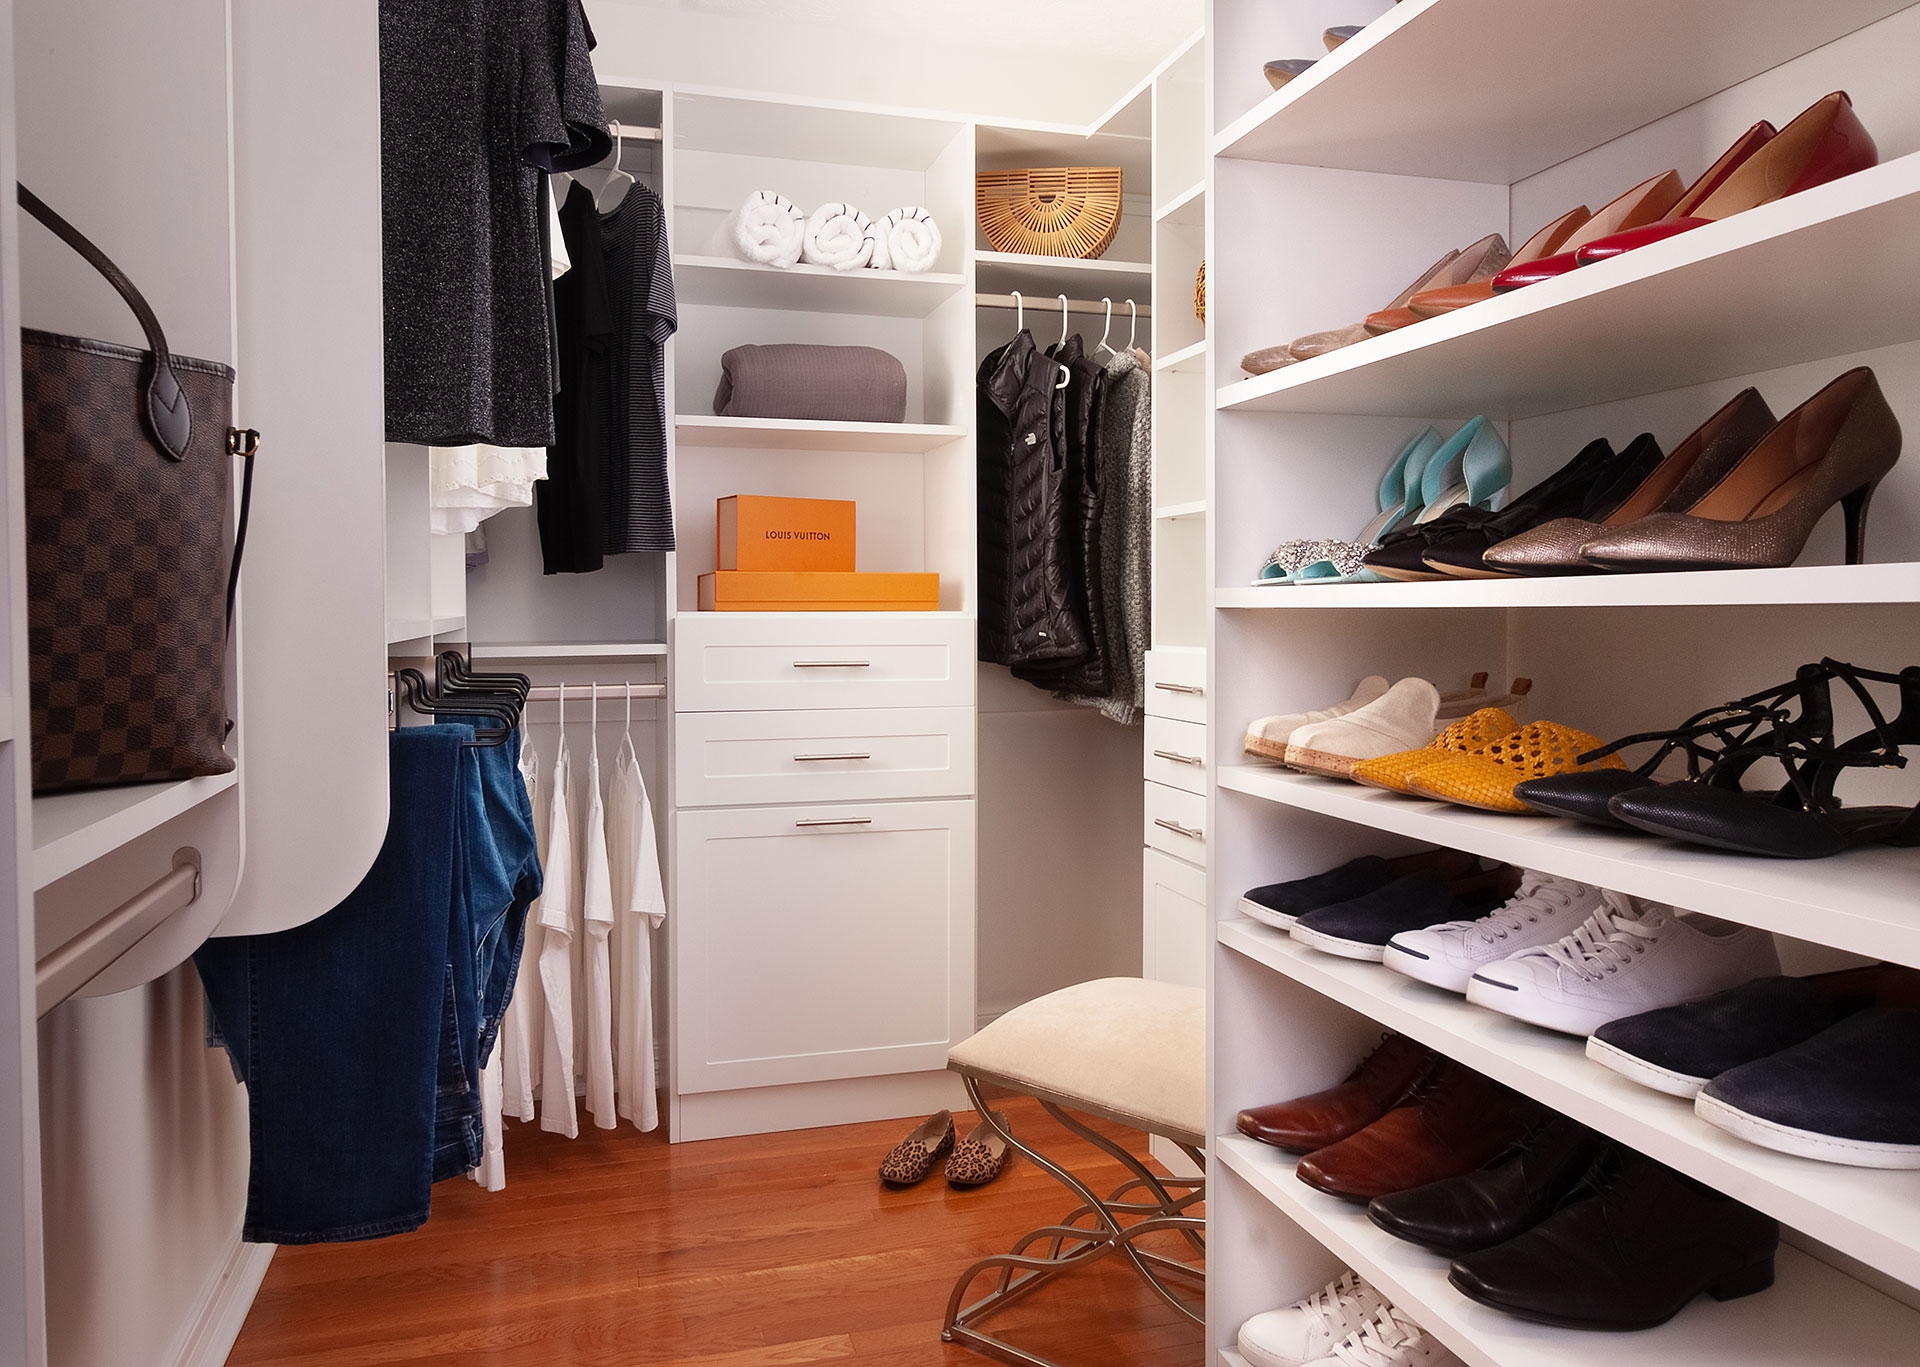 Do you need more organization in your home